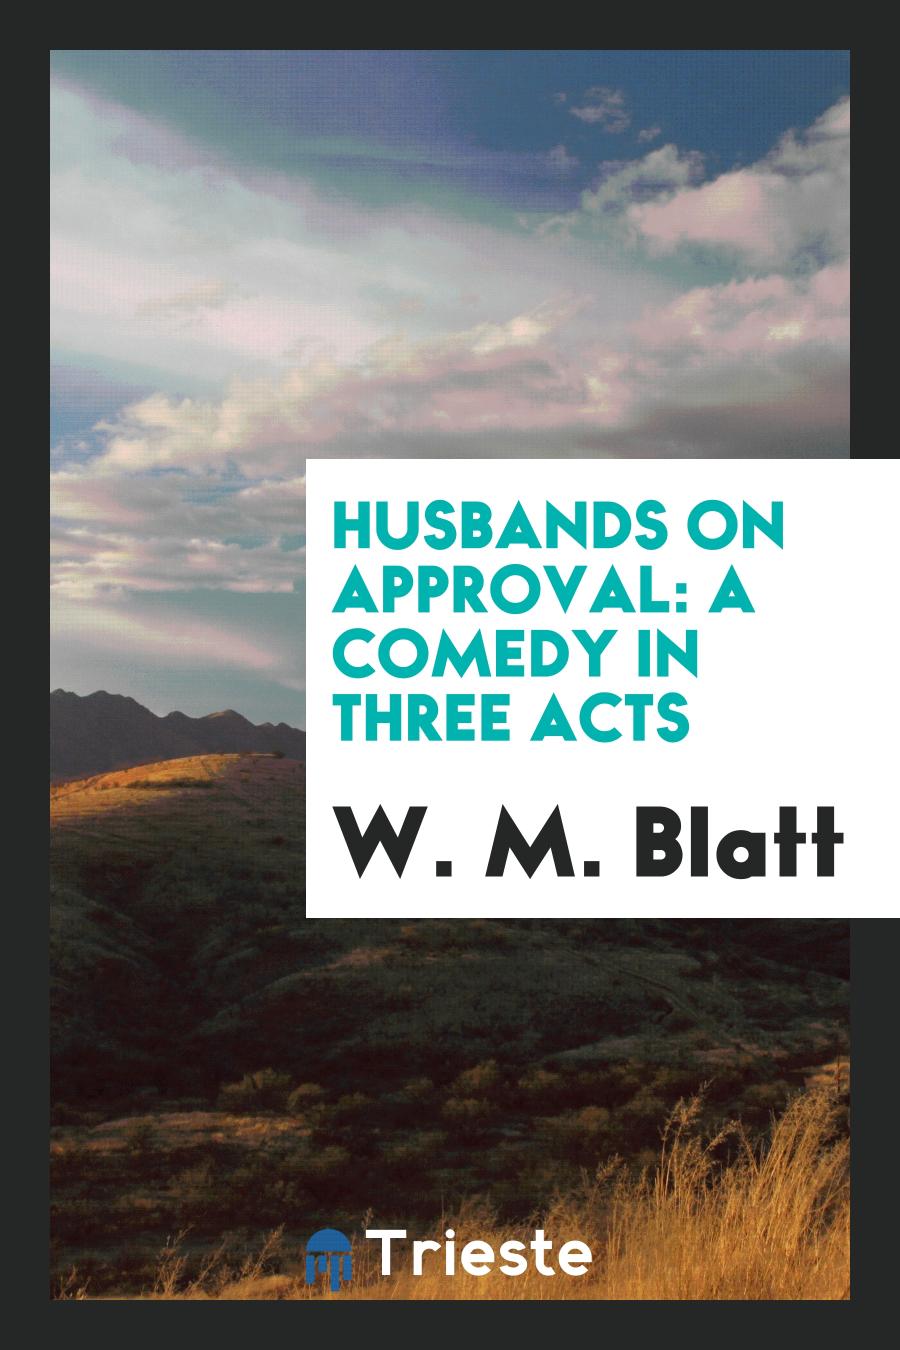 Husbands on Approval: A Comedy in Three Acts